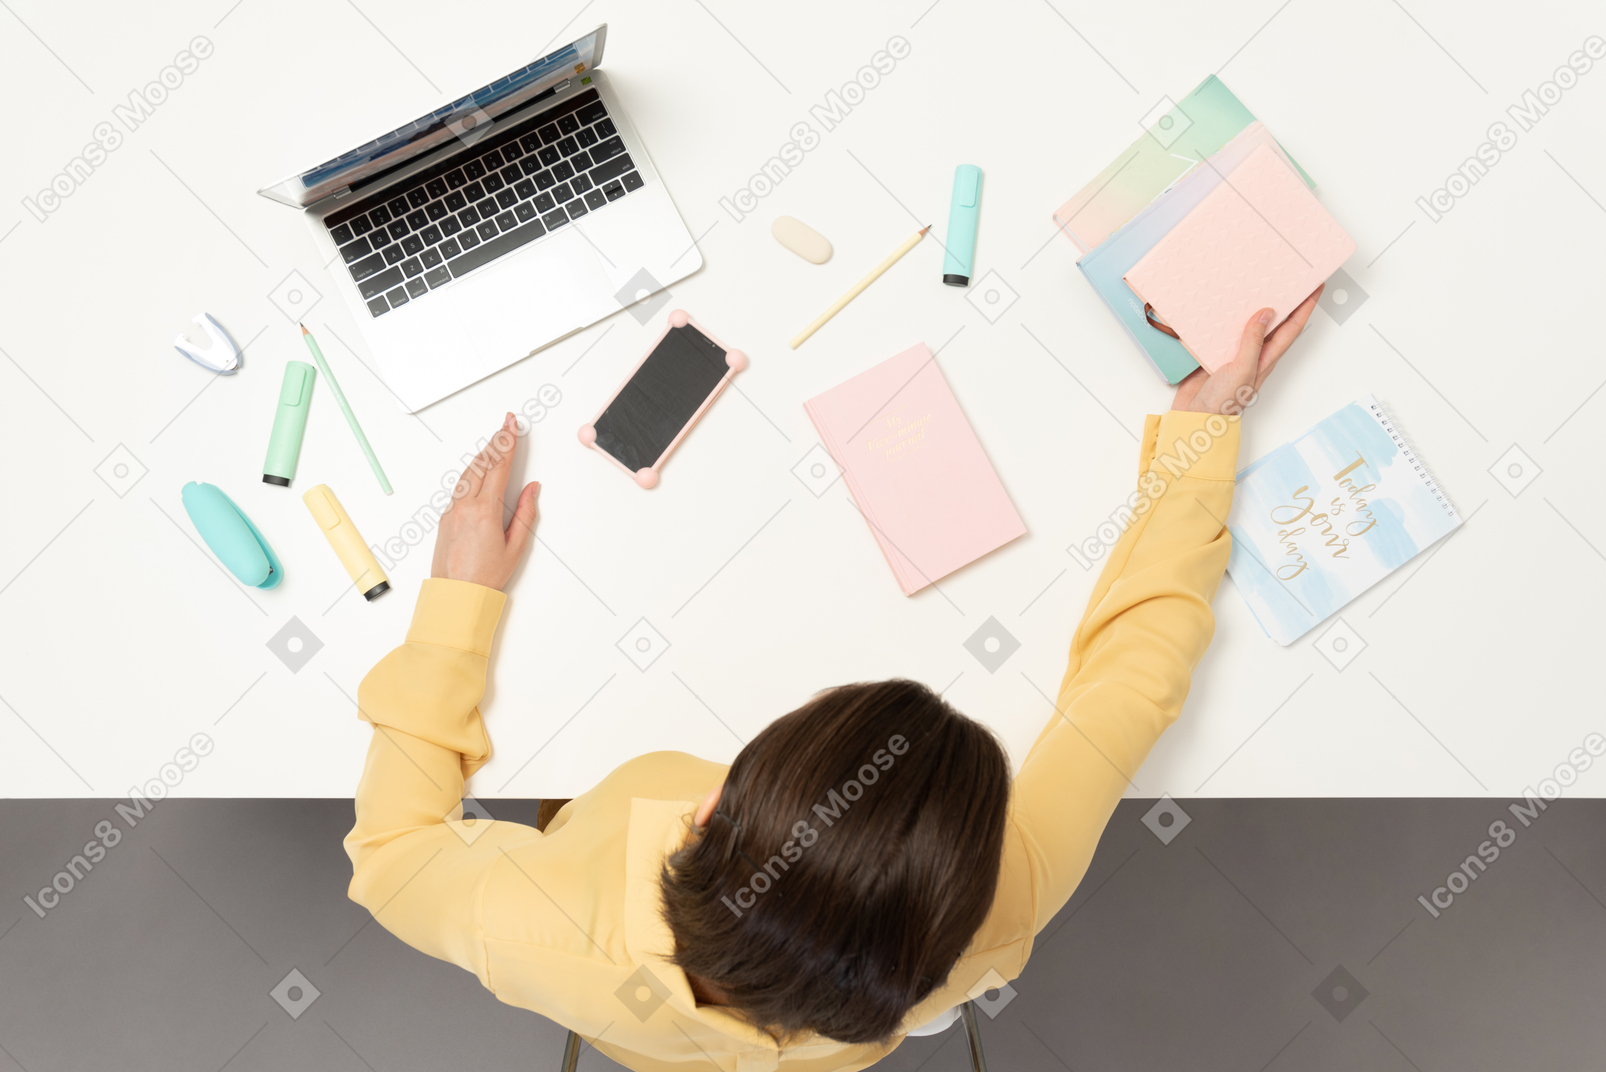 A female office worker at the table holding a notebook